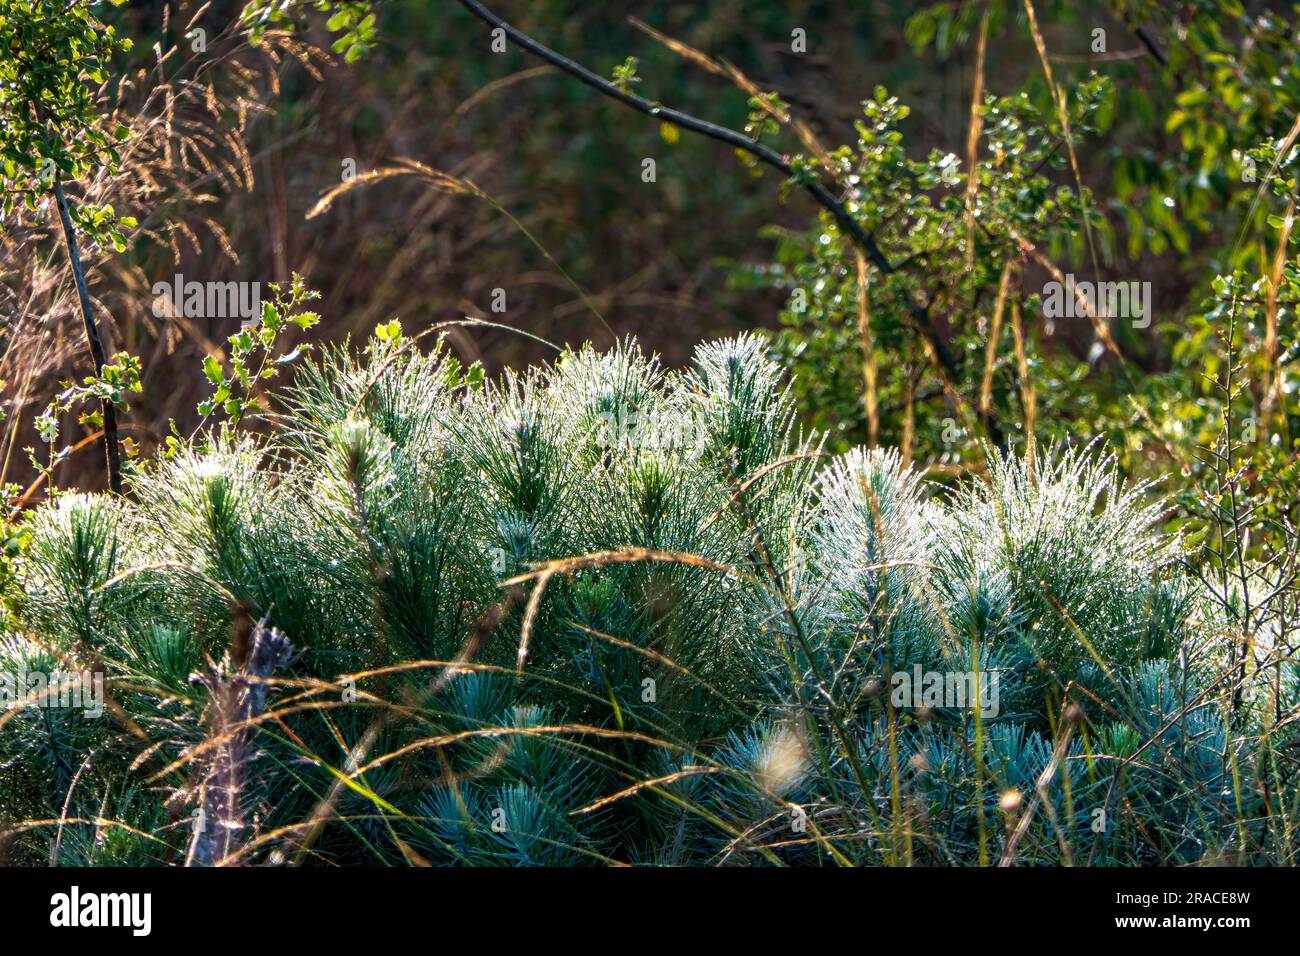 Young shoots of a pine tree in dew close-up. Mount Carmel at sunrise. Israel Stock Photo